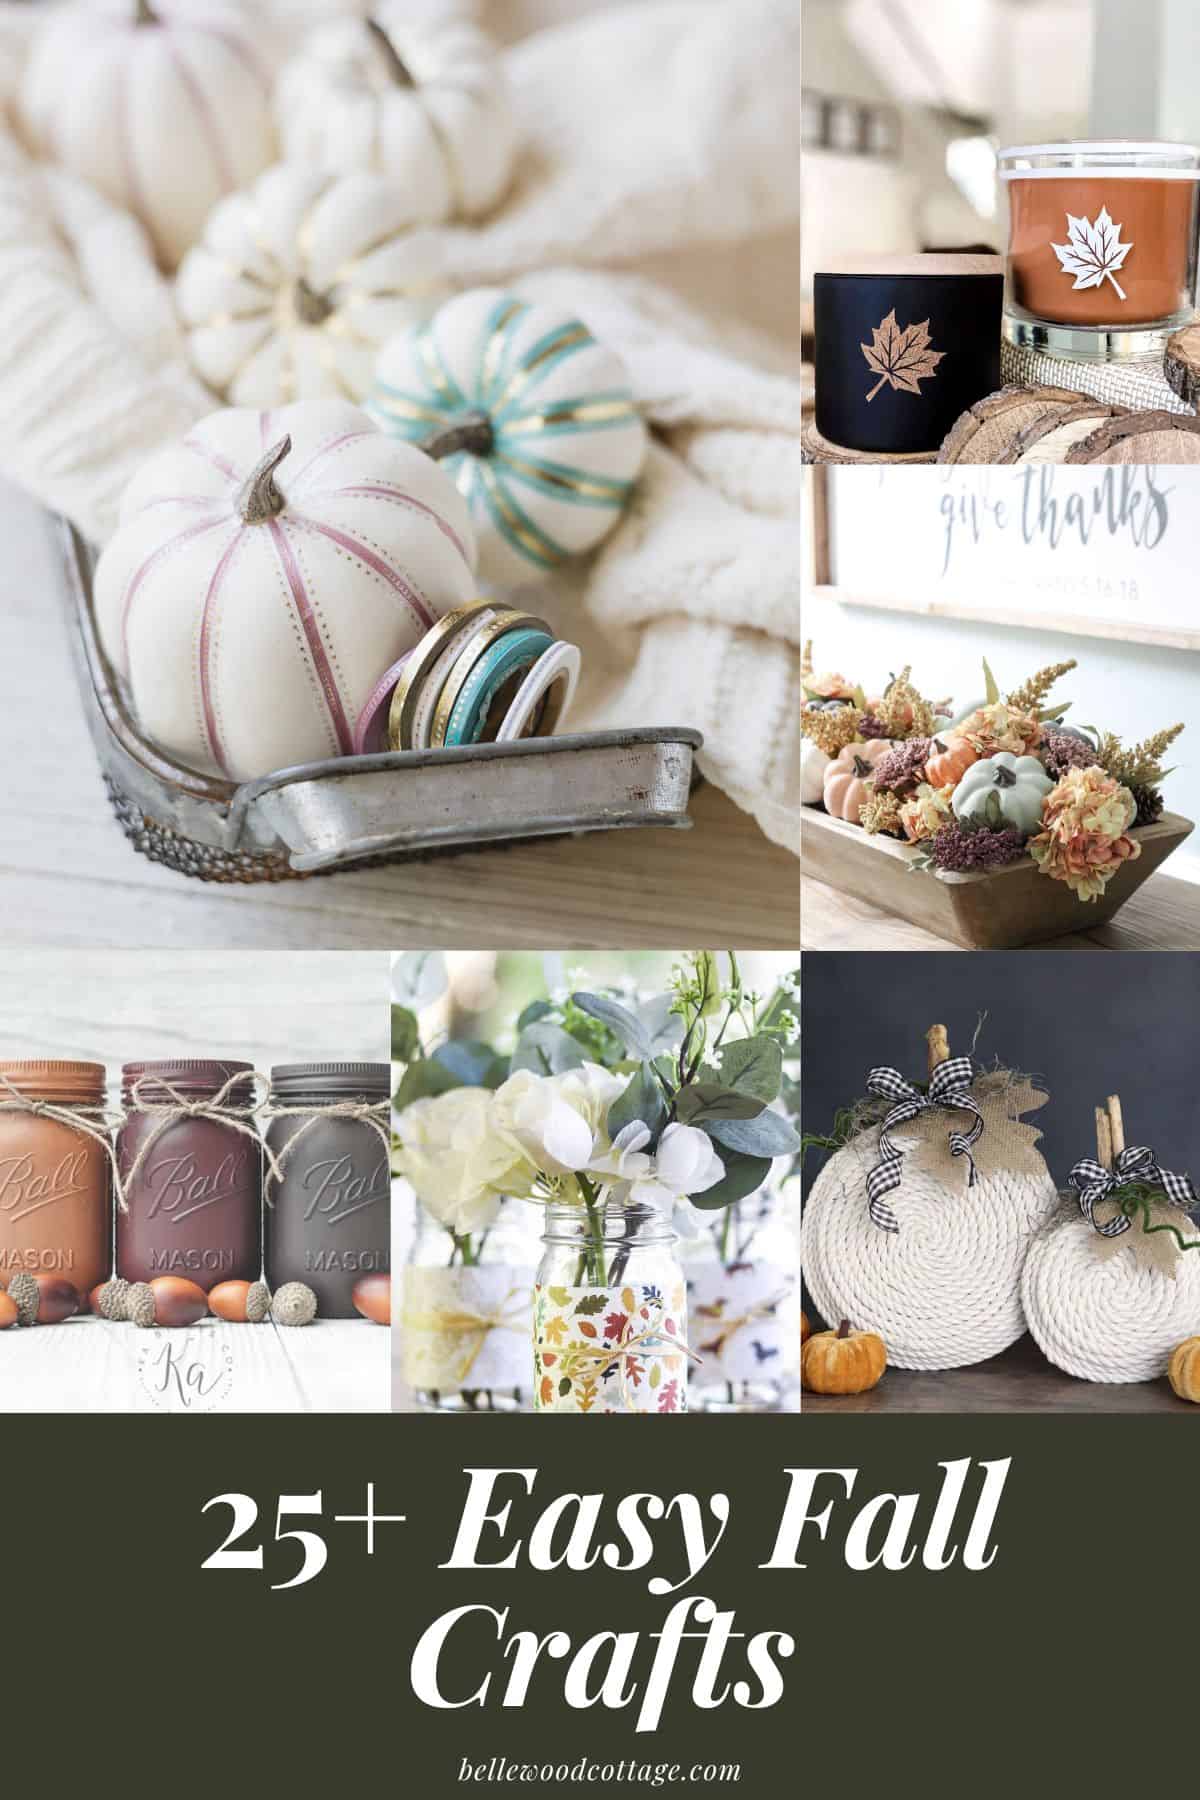 A collage of fall crafts like pumpkins and painted mason jars with the words, "25+ Easy Fall Crafts".